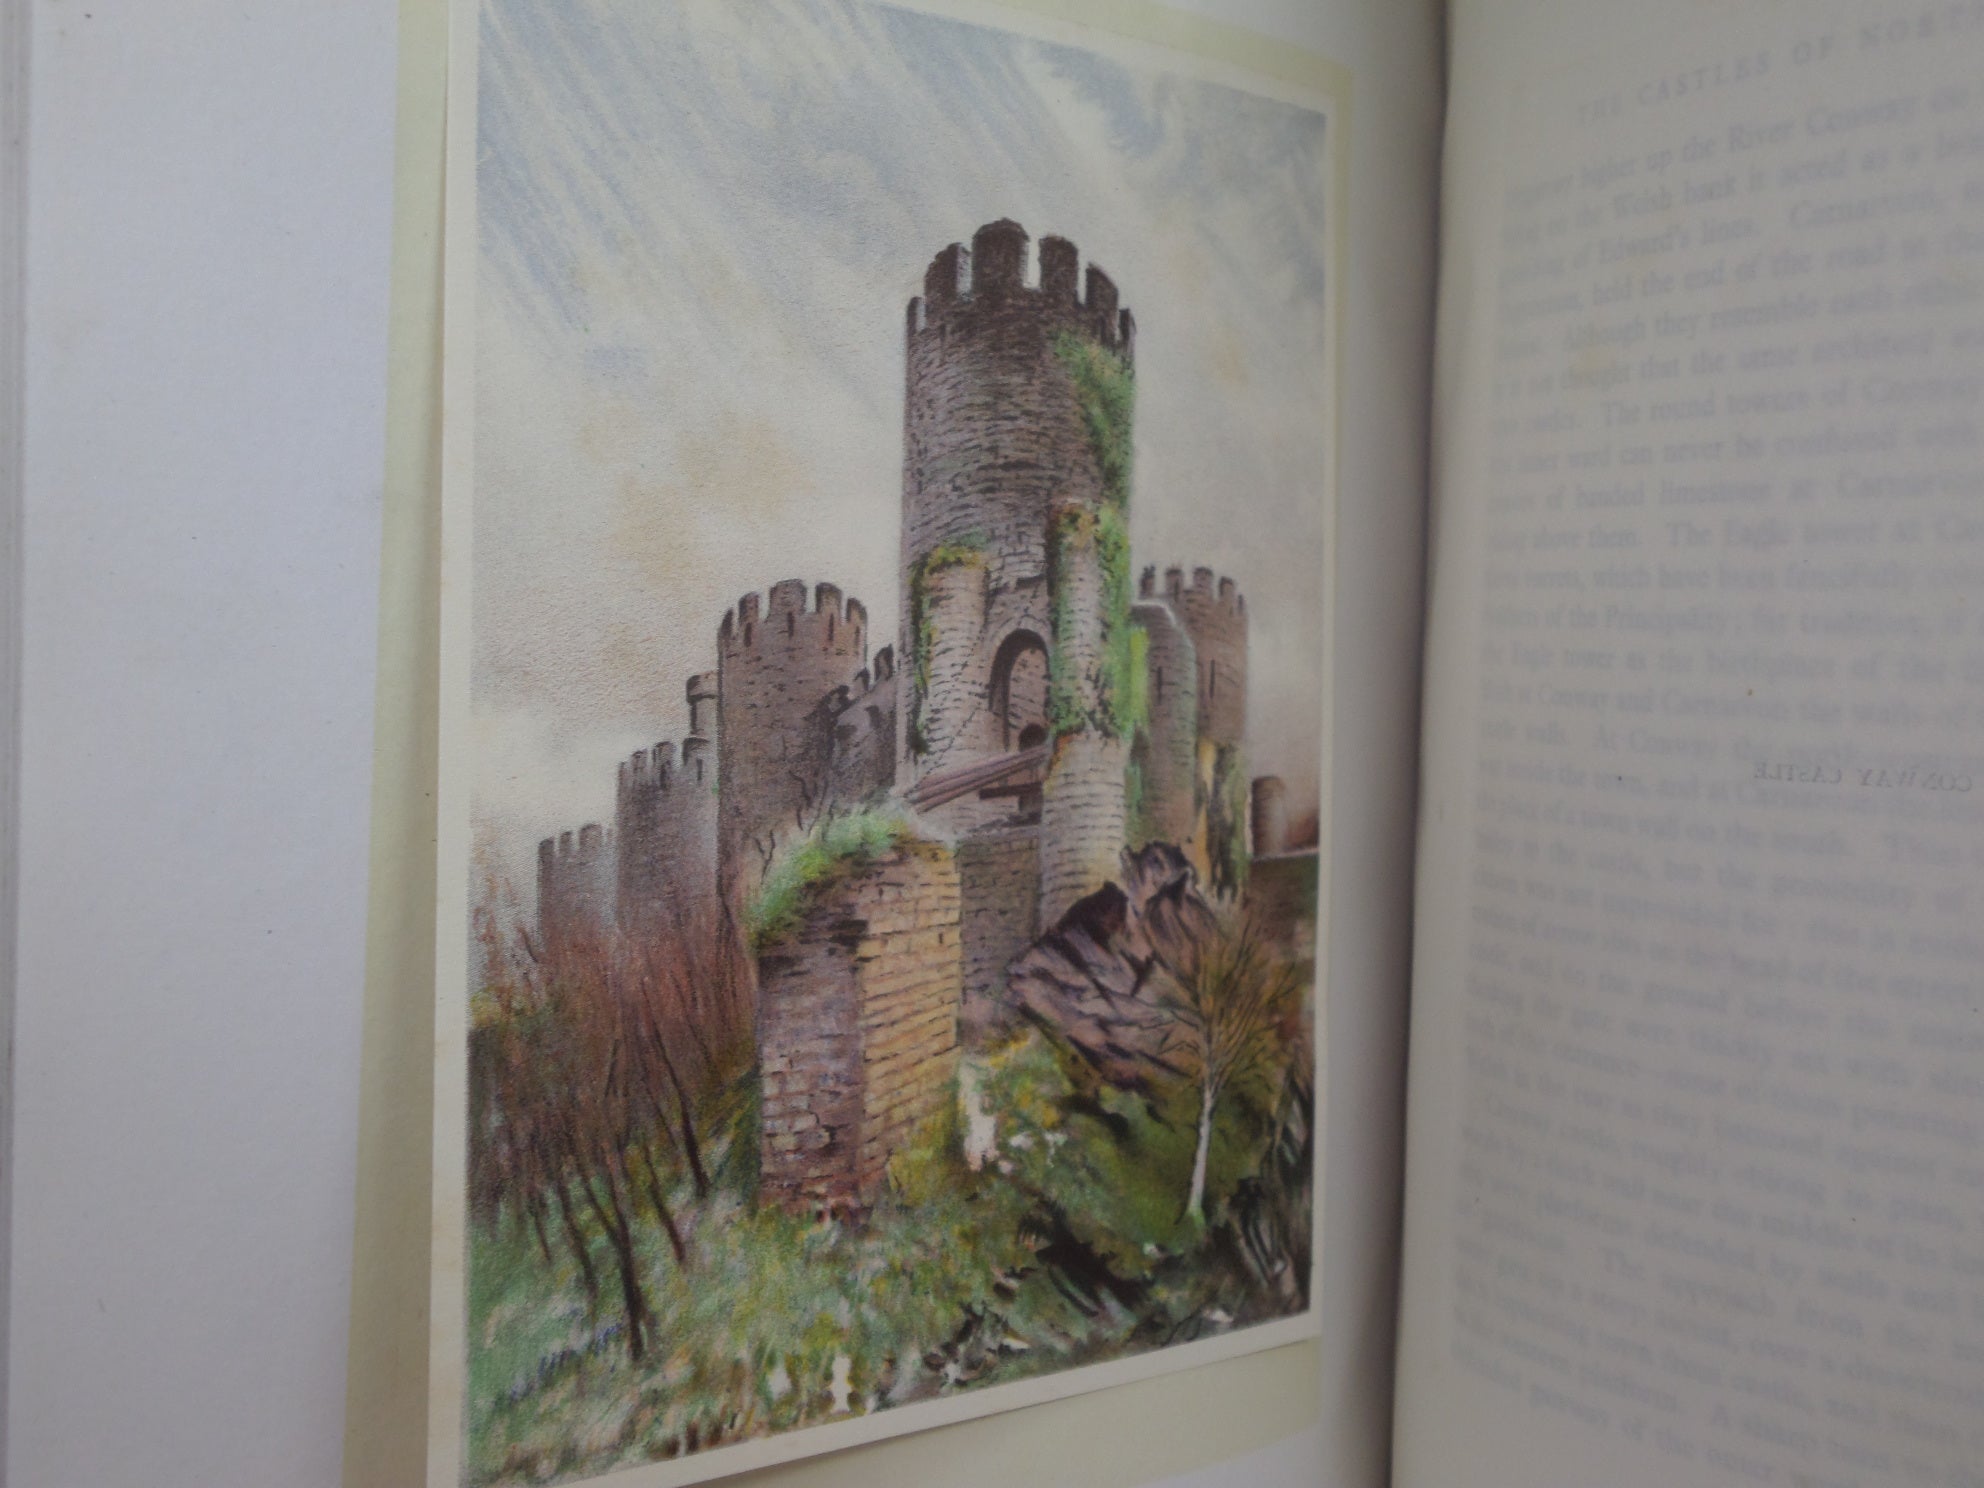 CASTLES OF ENGLAND AND WALES BY E.J. MACDONALD 1930 DELUXE LIMITED EDITION